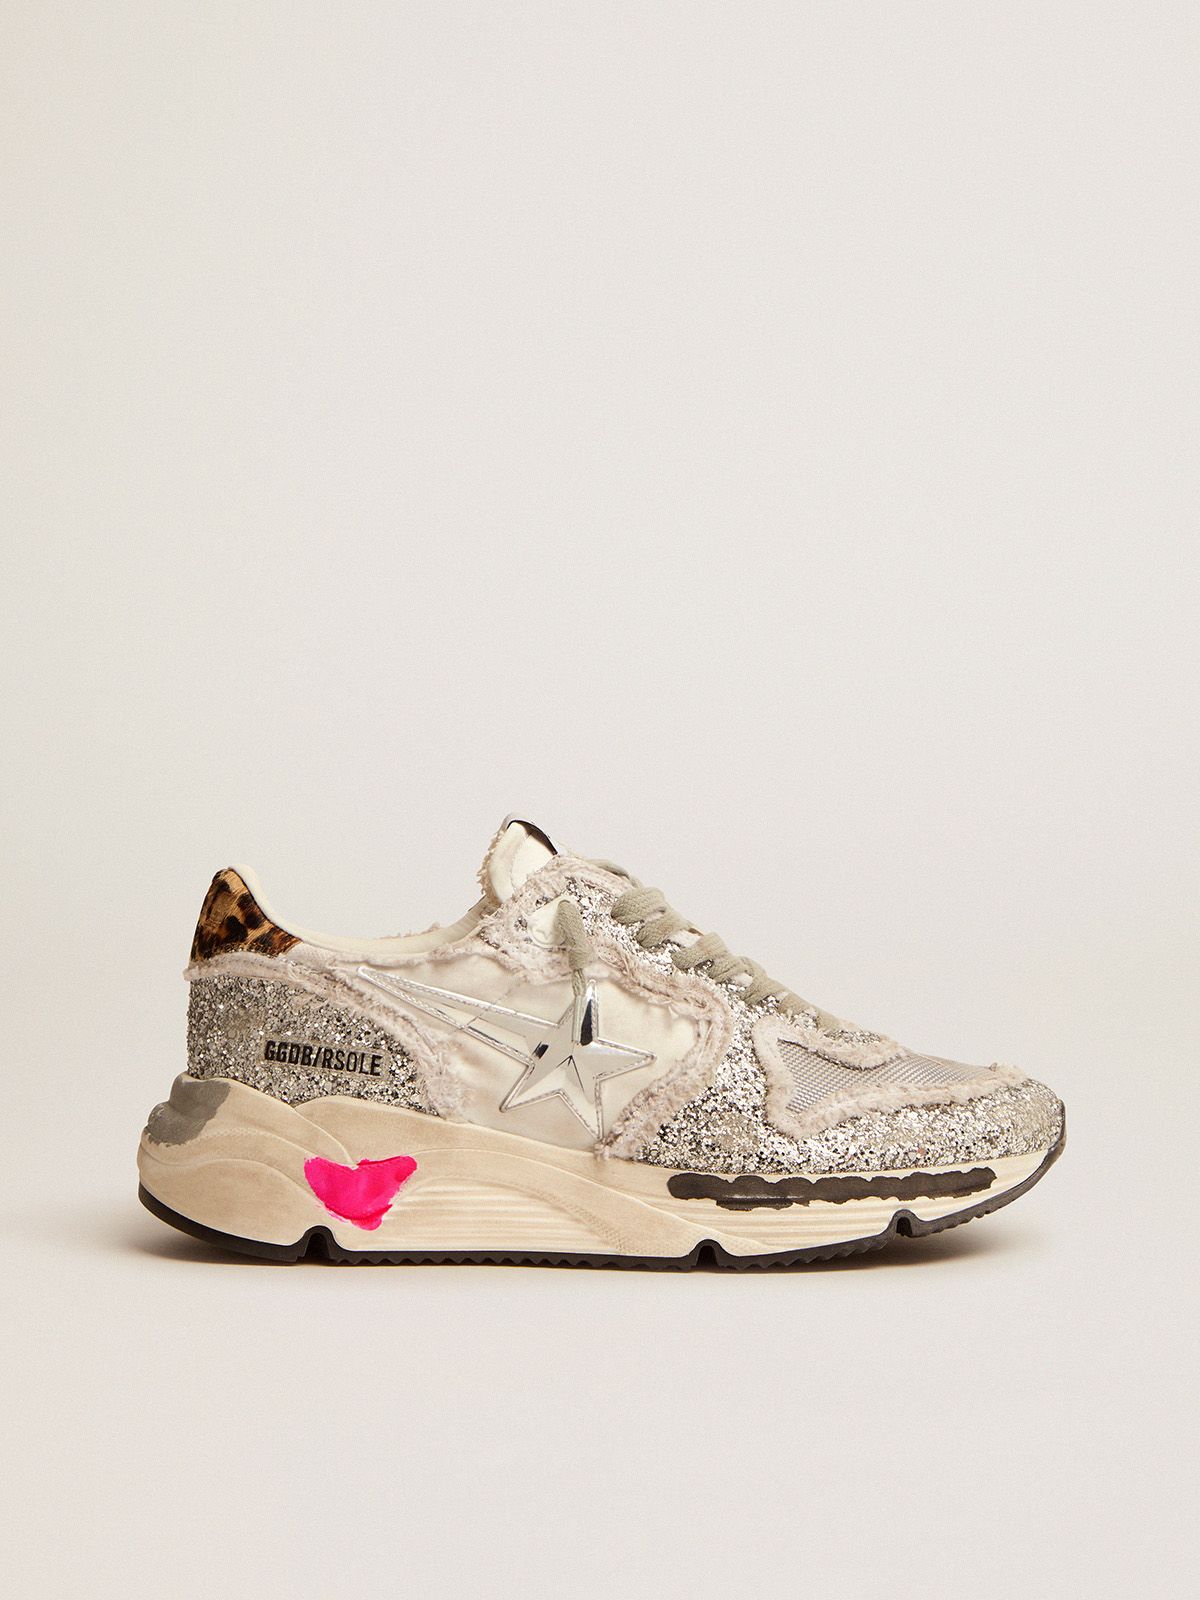 golden goose in skin Running leopard-print glitter sneakers nylon pony tab silver Sole heel with and